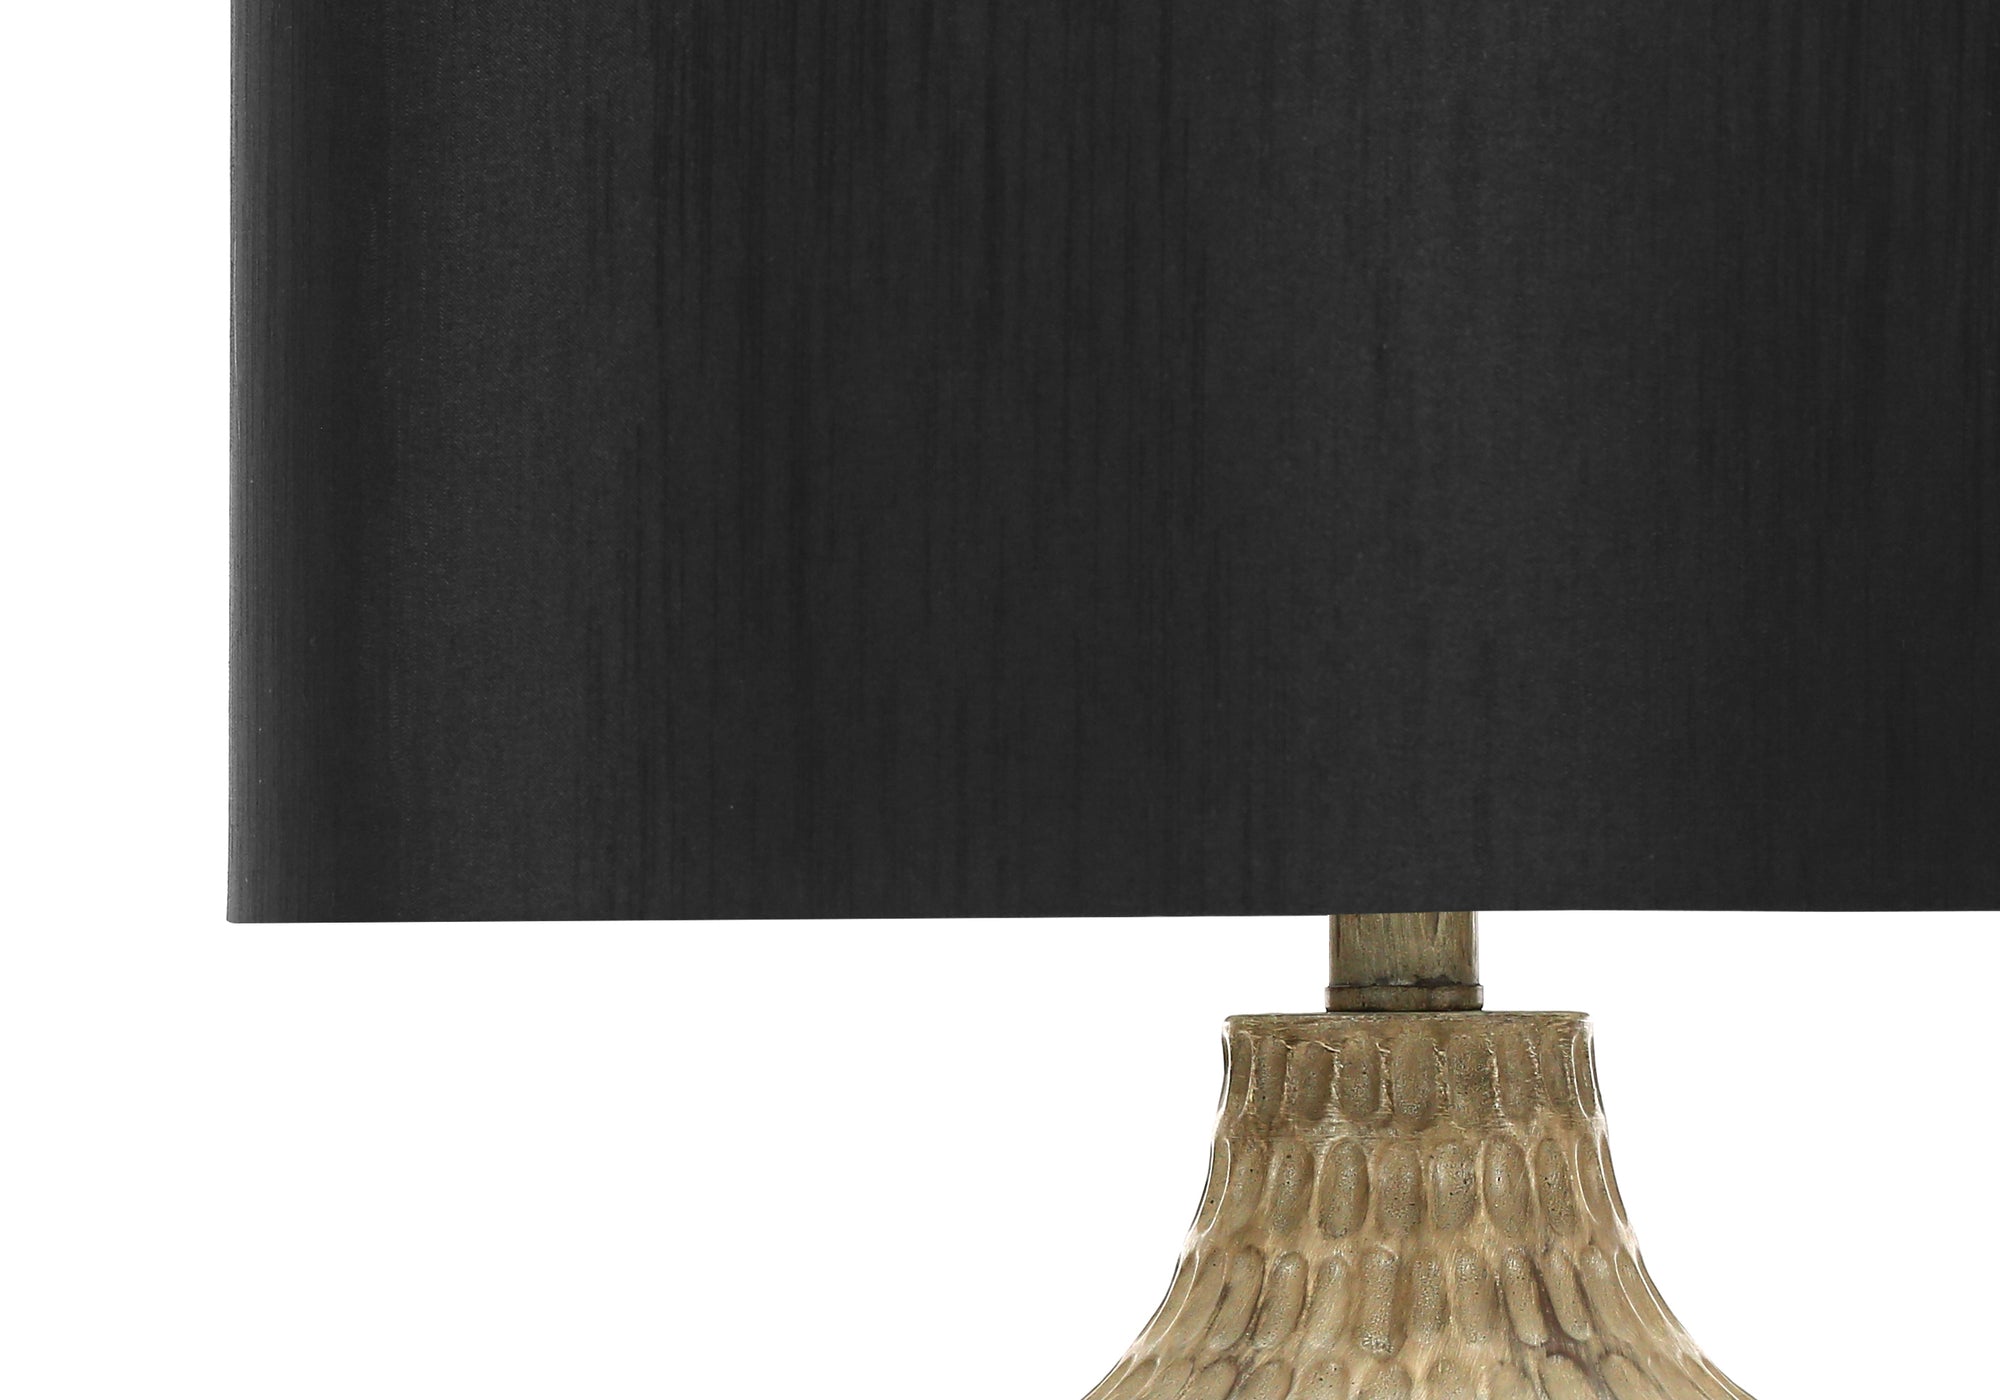 MN-819606    Lighting, 25"H, Table Lamp, Black Shade, Brown Resin, Contemporary